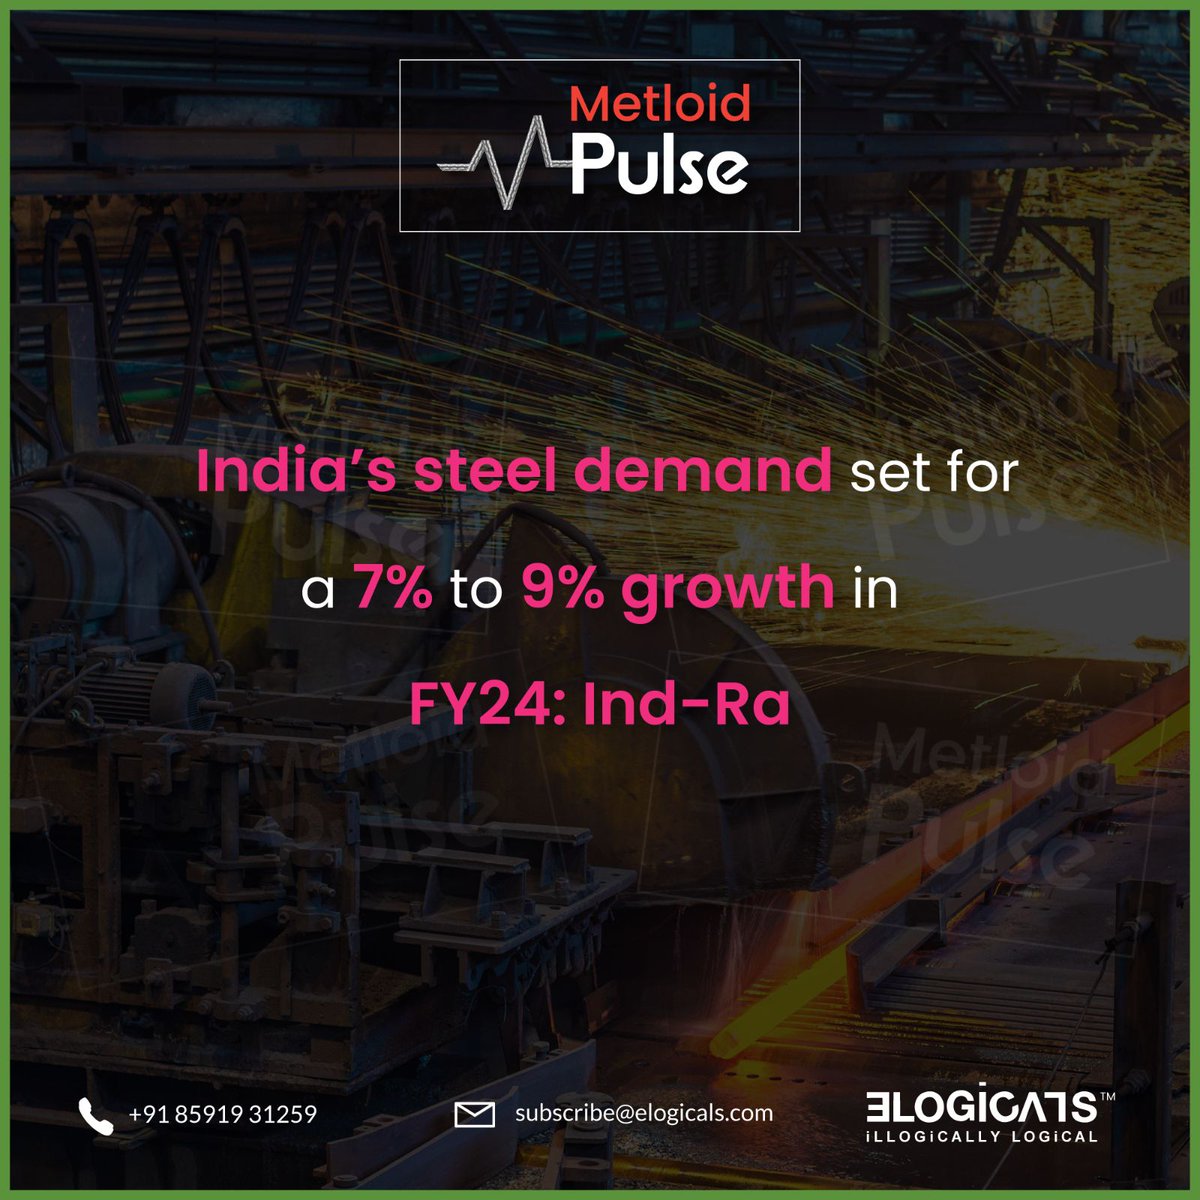 India’s steel demand set for a 7% to 9% growth in FY24: Ind-Ra.
Email: subscribe@elogicals.com
Mobile: +91-8591931259
Get all the latest steel, metal & mining news from the local Mandis, National & International sectors.
Call us at +91-9820056407 for the subscription.
#TheMetloid